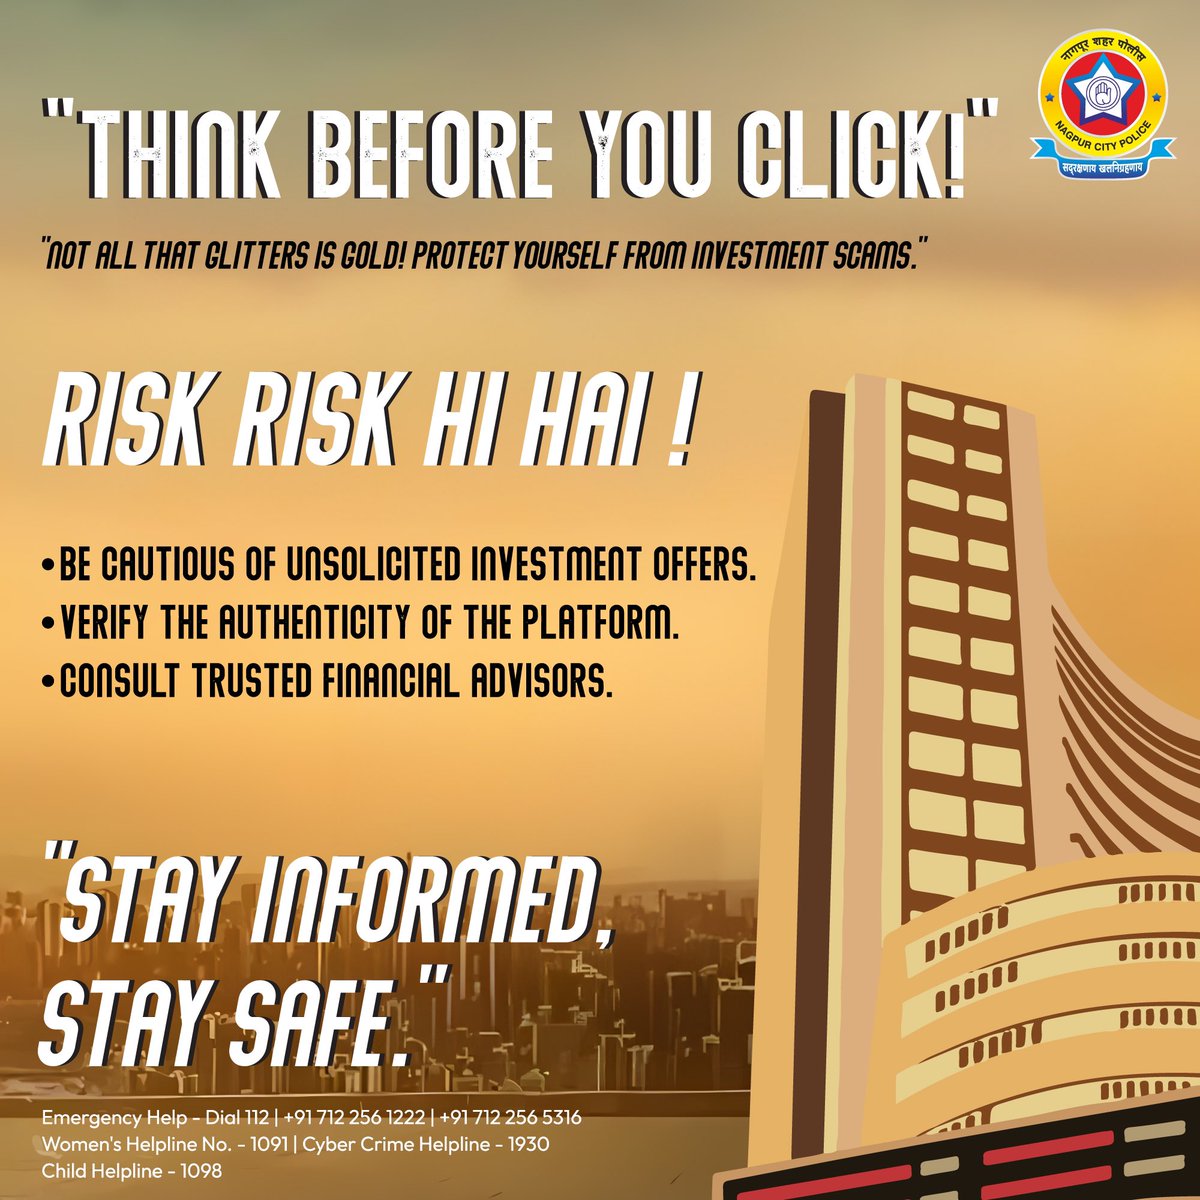 Stay vigilant against investment scams! 🚨 Always verify the platform, be cautious of unsolicited offers, and consult trusted financial advisors. Protect your hard-earned money. #ThinkBeforeYouClick #InvestmentScams #StaySafe #CyberSafety #NagpurPolice #ravindersingal